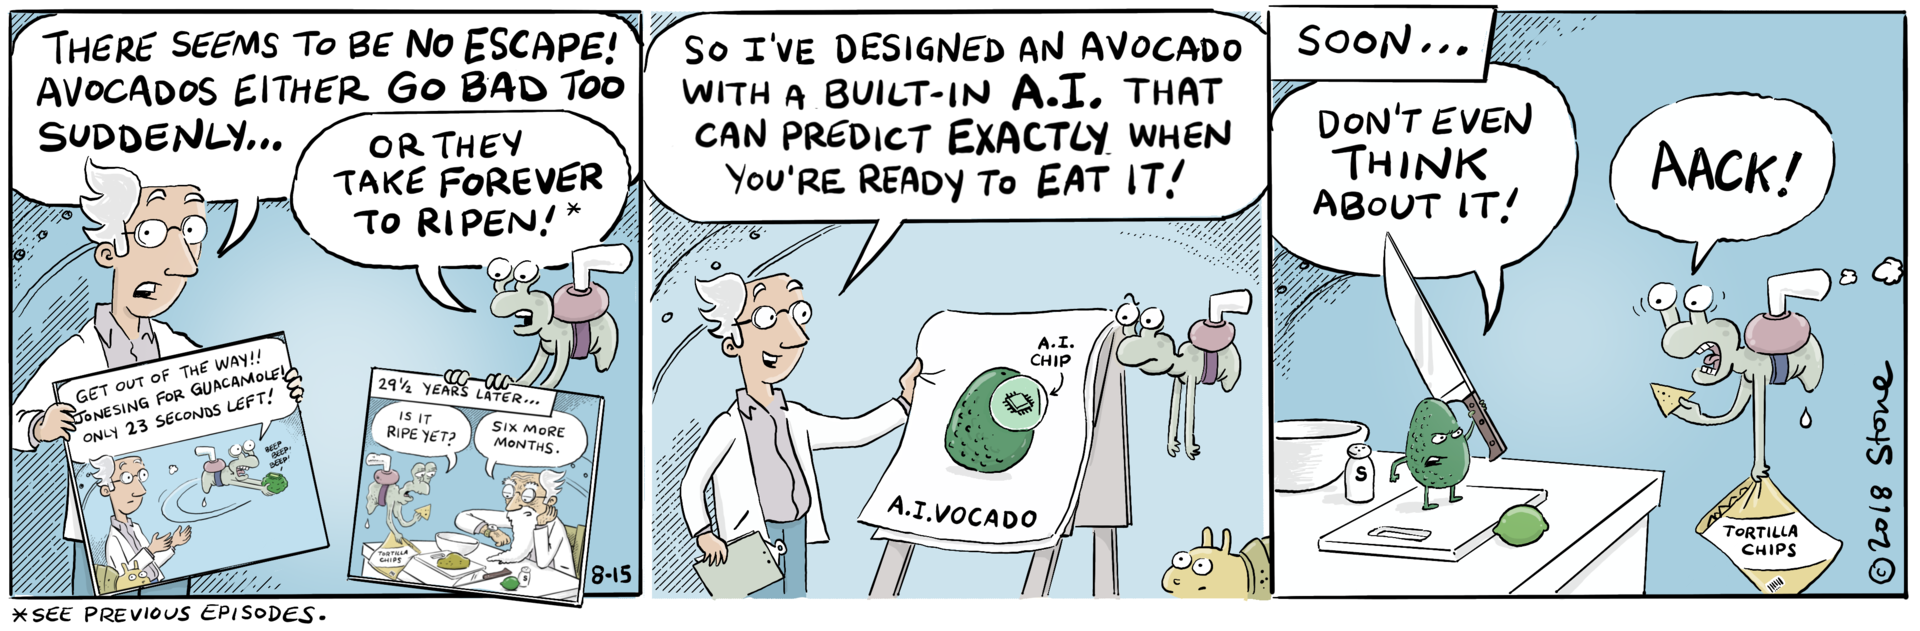 Zeno's genetically modified avocados become self-aware and wreak havok in the lab. (Part 3)